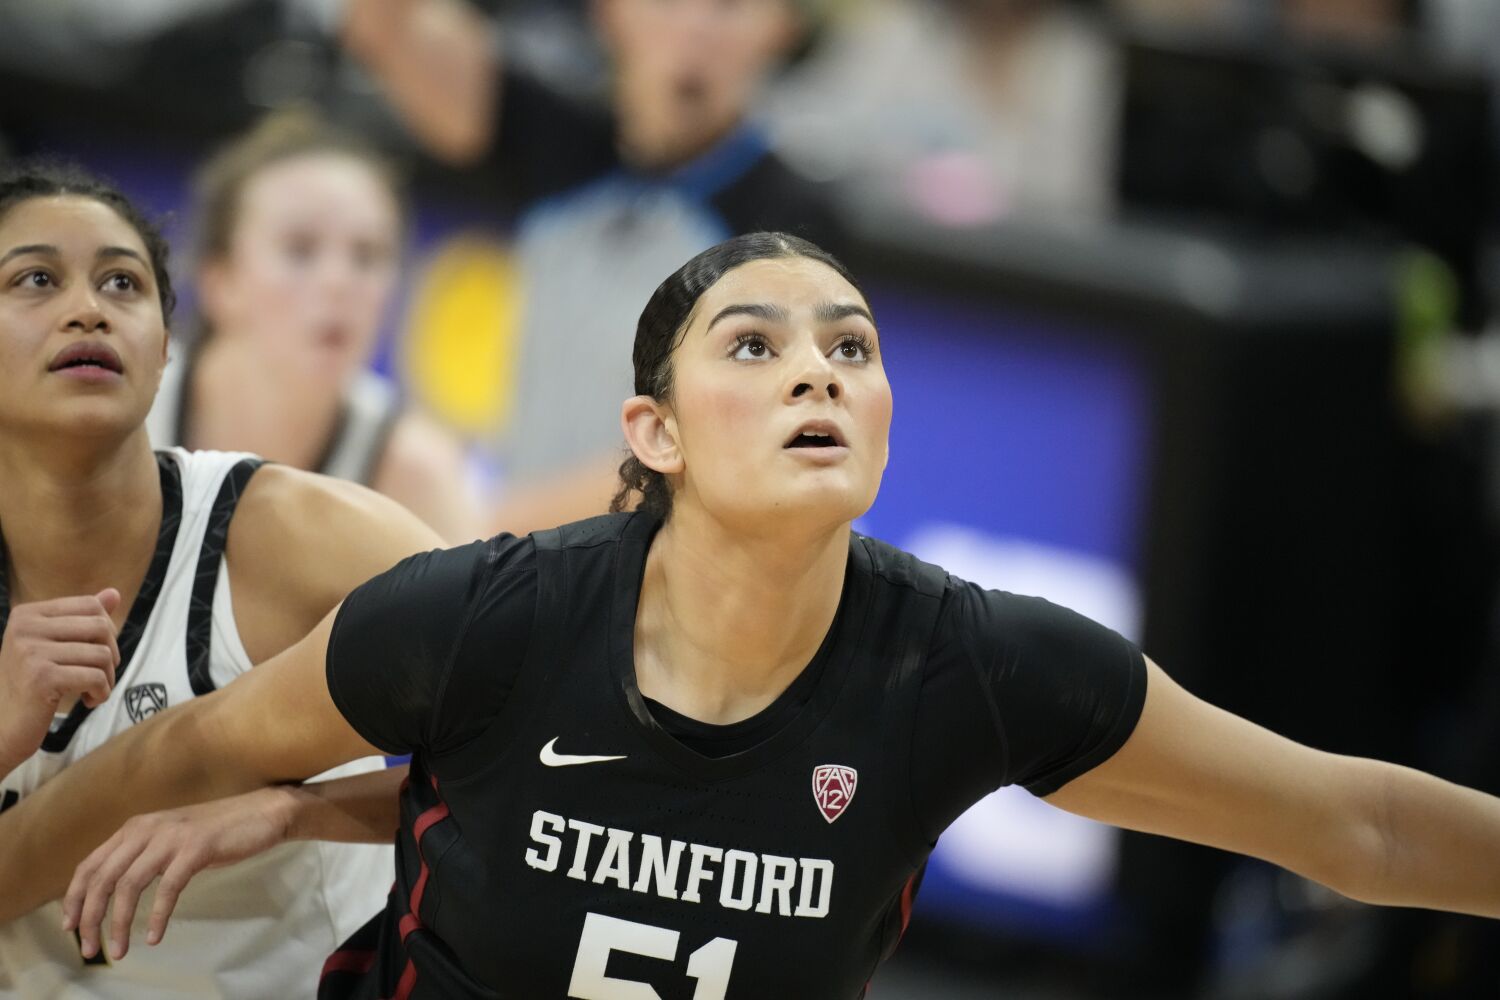 UCLA basketball adds Stanford transfer Lauren Betts, the No. 1 prospect in 2022 class